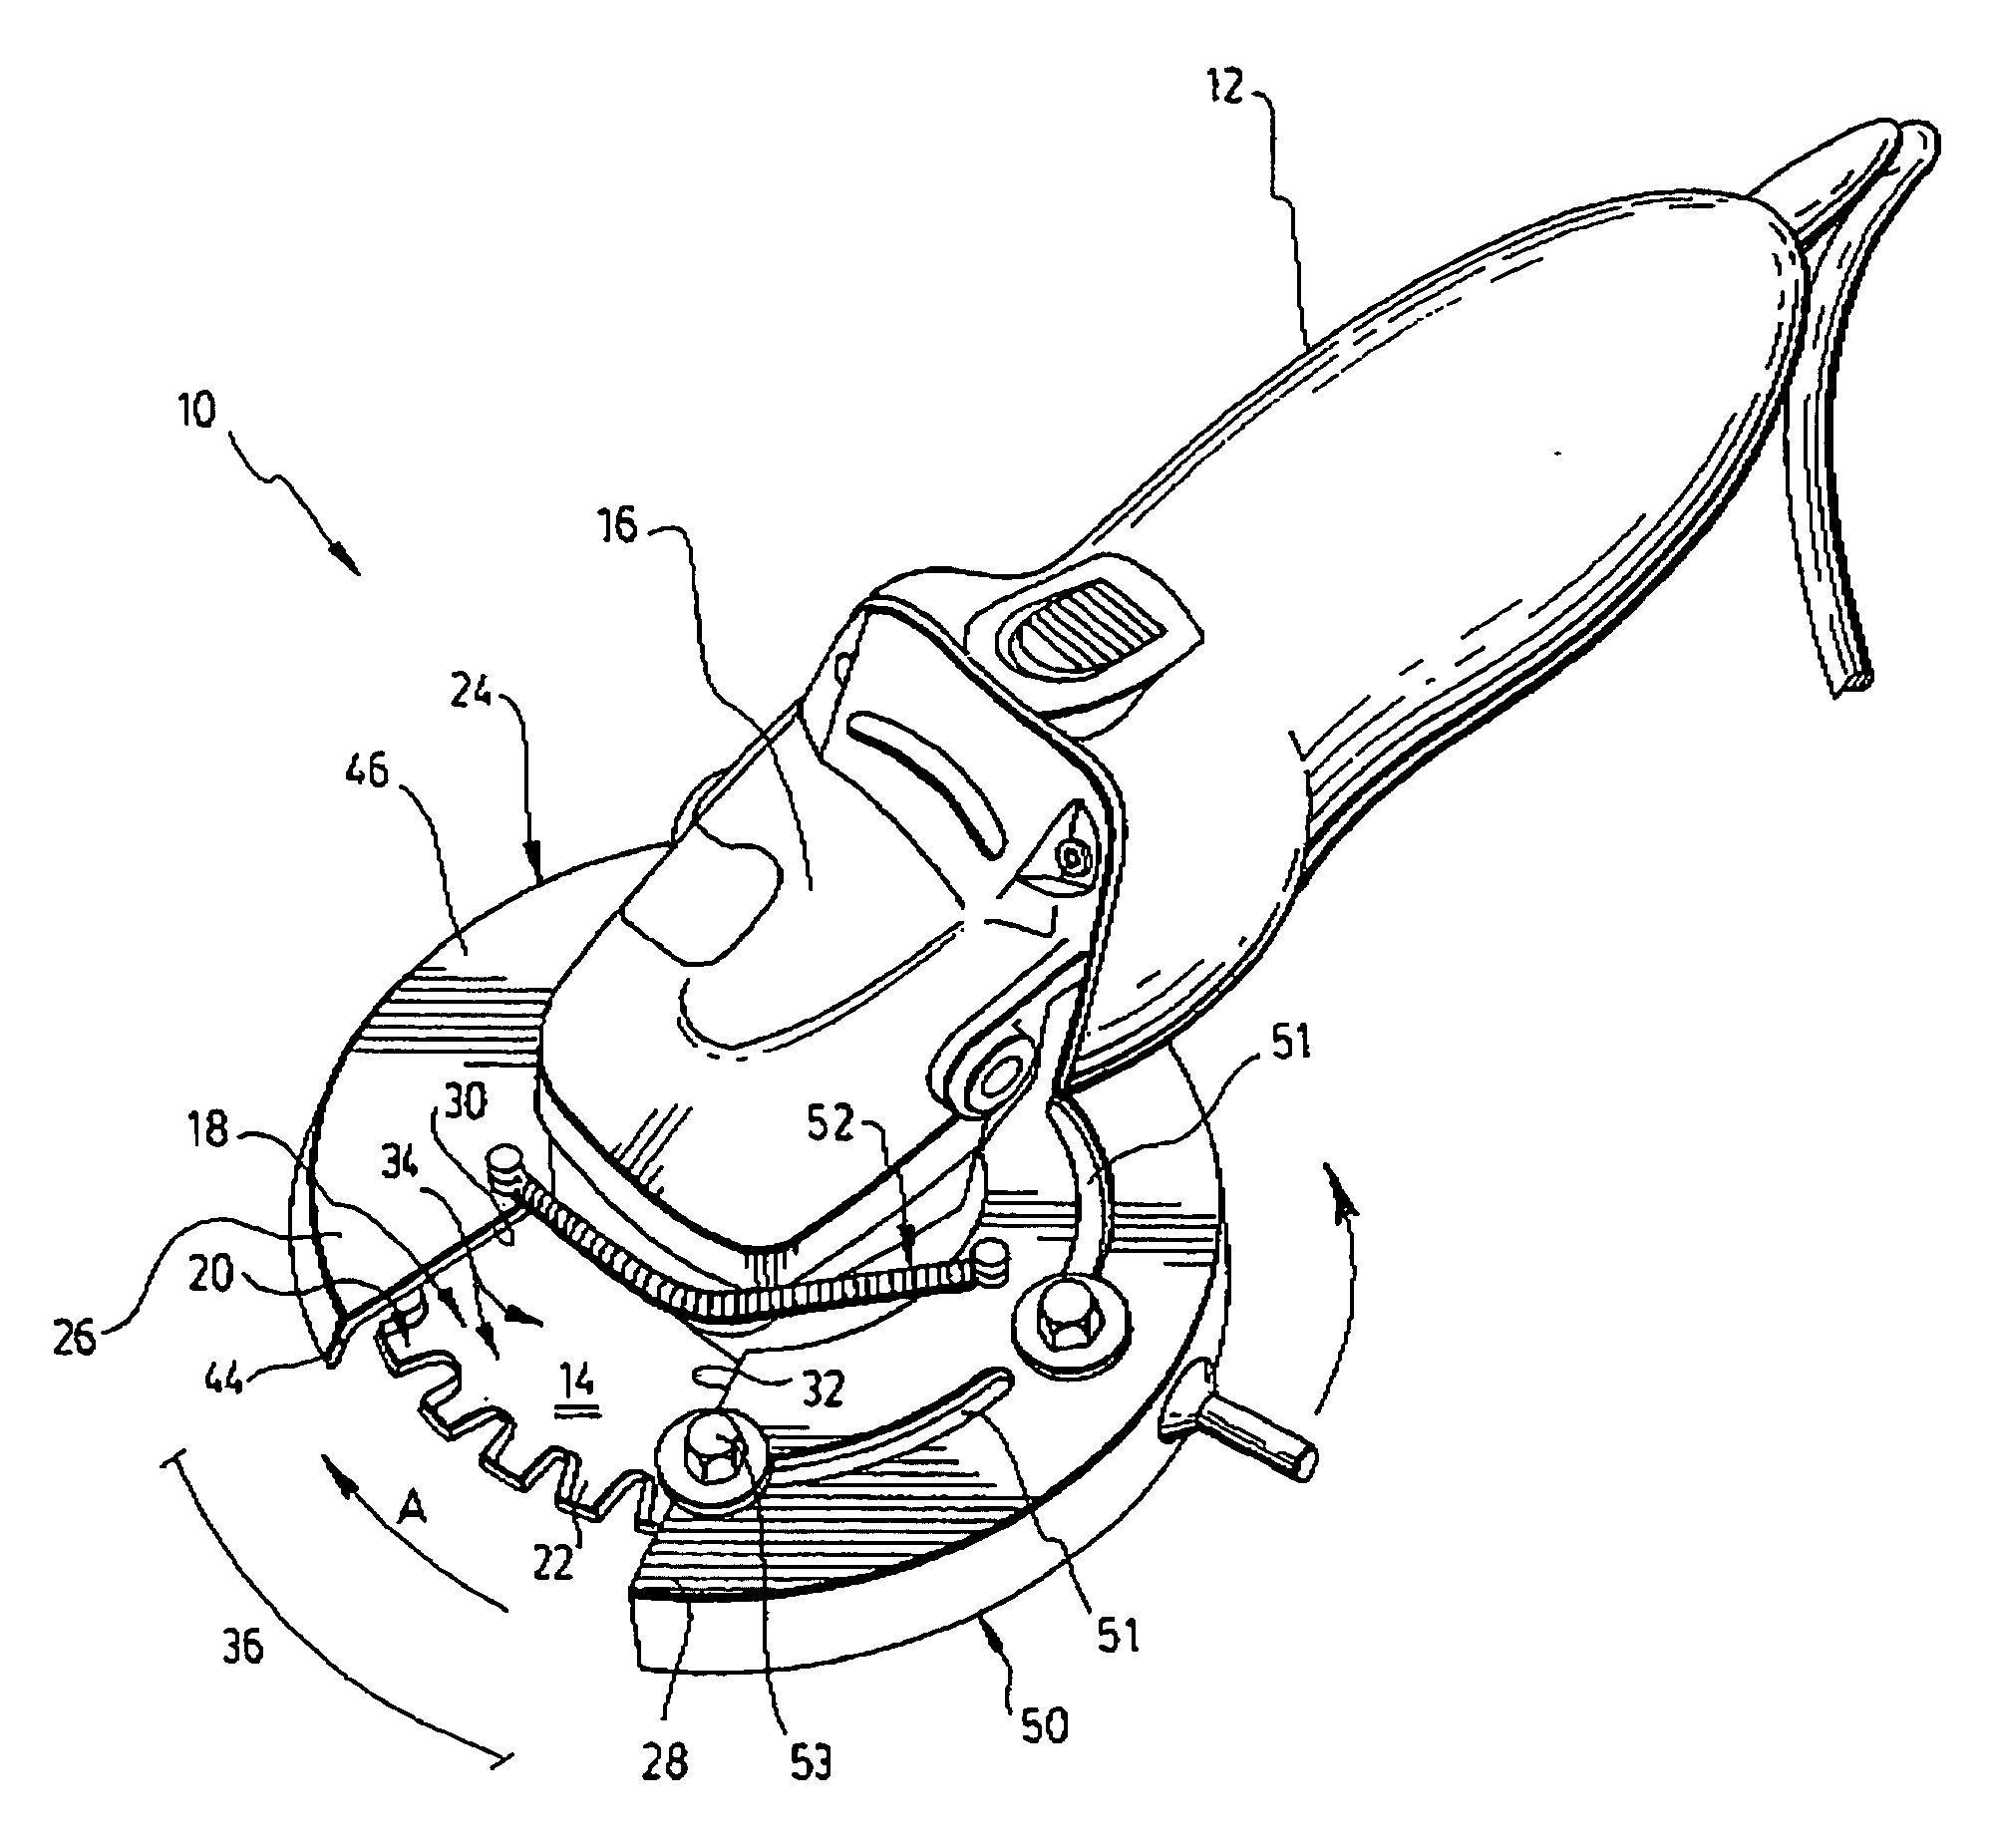 Portable cutting device with guiding guard